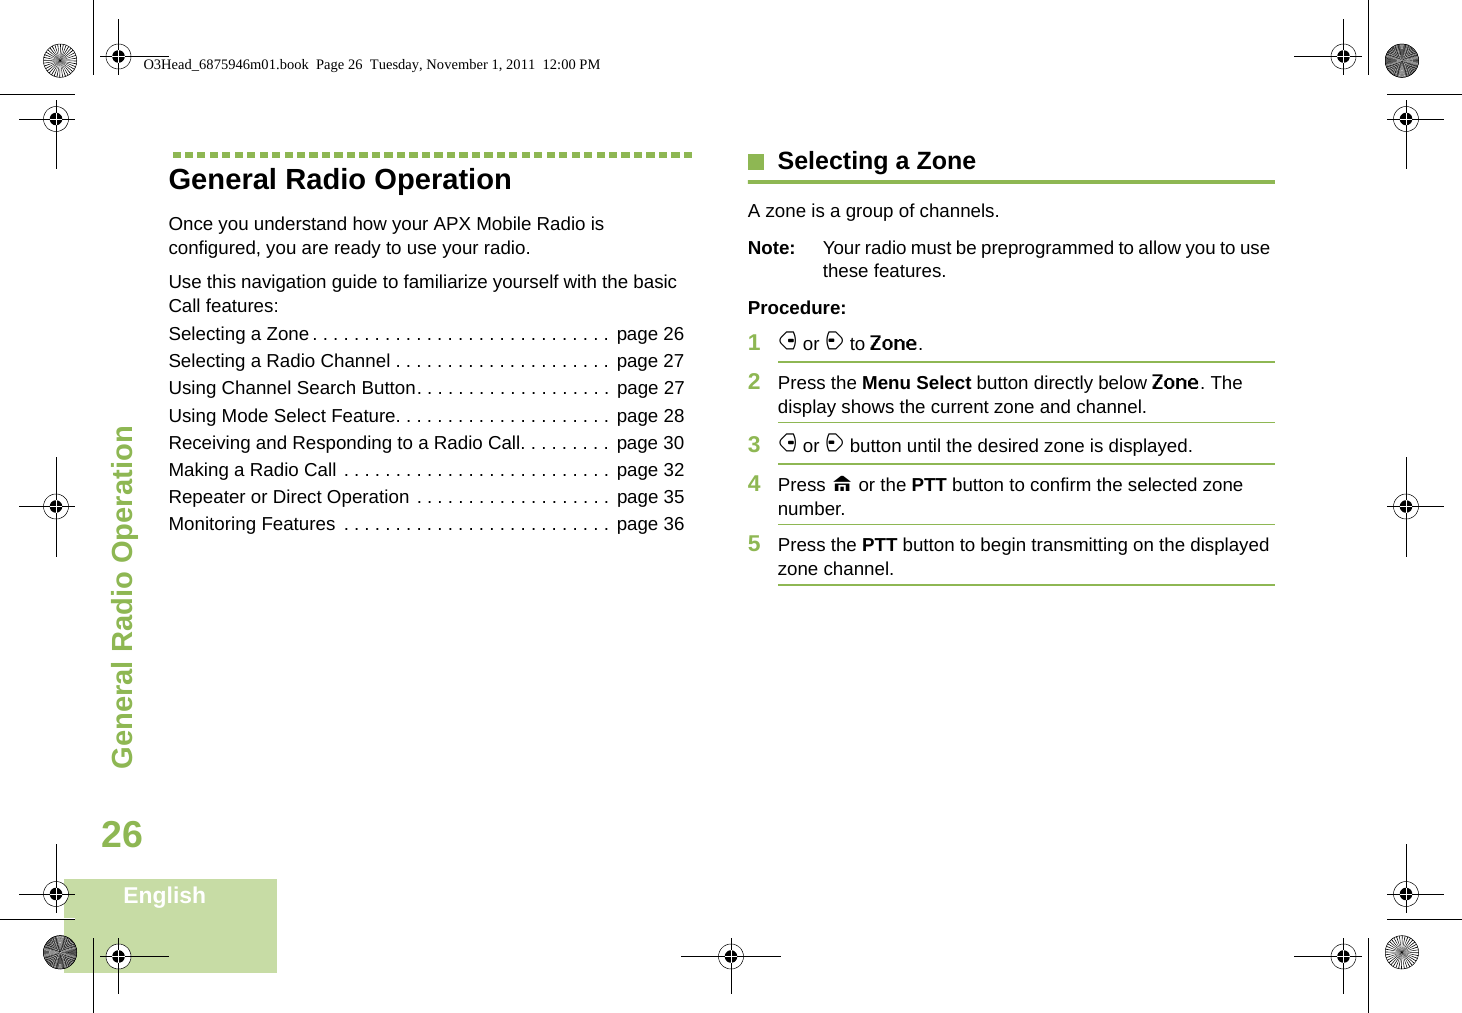 General Radio OperationEnglish26General Radio OperationOnce you understand how your APX Mobile Radio is configured, you are ready to use your radio.Use this navigation guide to familiarize yourself with the basic Call features:Selecting a Zone. . . . . . . . . . . . . . . . . . . . . . . . . . . . .  page 26Selecting a Radio Channel . . . . . . . . . . . . . . . . . . . . . page 27Using Channel Search Button. . . . . . . . . . . . . . . . . . . page 27Using Mode Select Feature. . . . . . . . . . . . . . . . . . . . .  page 28Receiving and Responding to a Radio Call. . . . . . . . . page 30Making a Radio Call . . . . . . . . . . . . . . . . . . . . . . . . . .  page 32Repeater or Direct Operation . . . . . . . . . . . . . . . . . . . page 35Monitoring Features . . . . . . . . . . . . . . . . . . . . . . . . . . page 36Selecting a ZoneA zone is a group of channels.Note: Your radio must be preprogrammed to allow you to use these features.Procedure:1f or a to Zone.2Press the Menu Select button directly below Zone. The display shows the current zone and channel.3f or a button until the desired zone is displayed.4Press H or the PTT button to confirm the selected zone number. 5Press the PTT button to begin transmitting on the displayed zone channel.O3Head_6875946m01.book  Page 26  Tuesday, November 1, 2011  12:00 PM